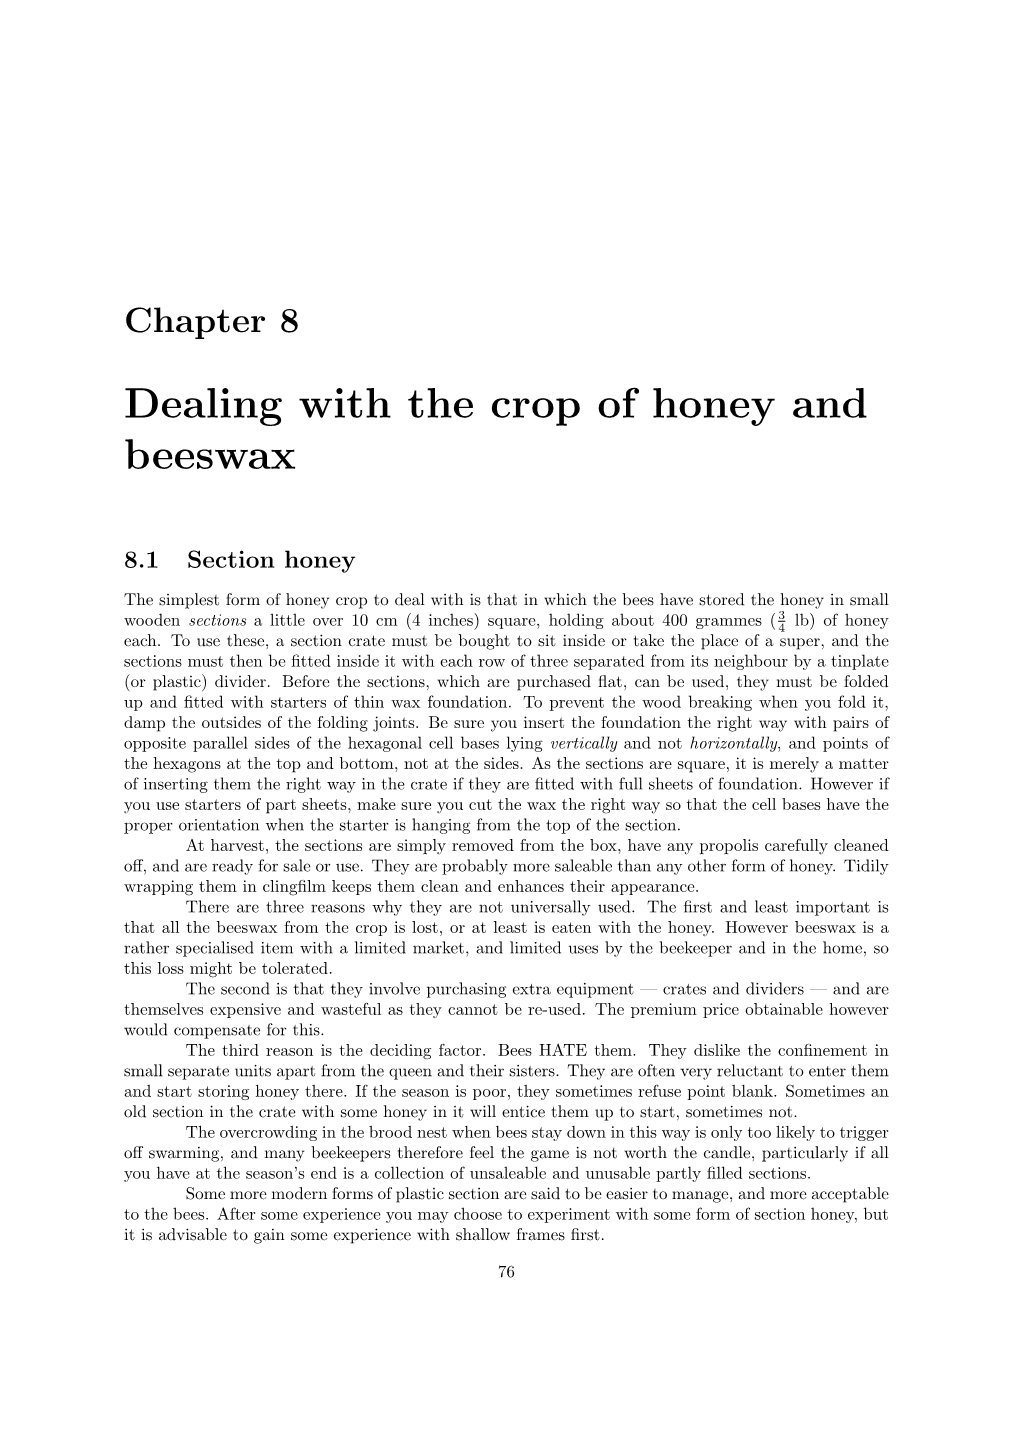 Dealing with the Crop of Honey and Beeswax